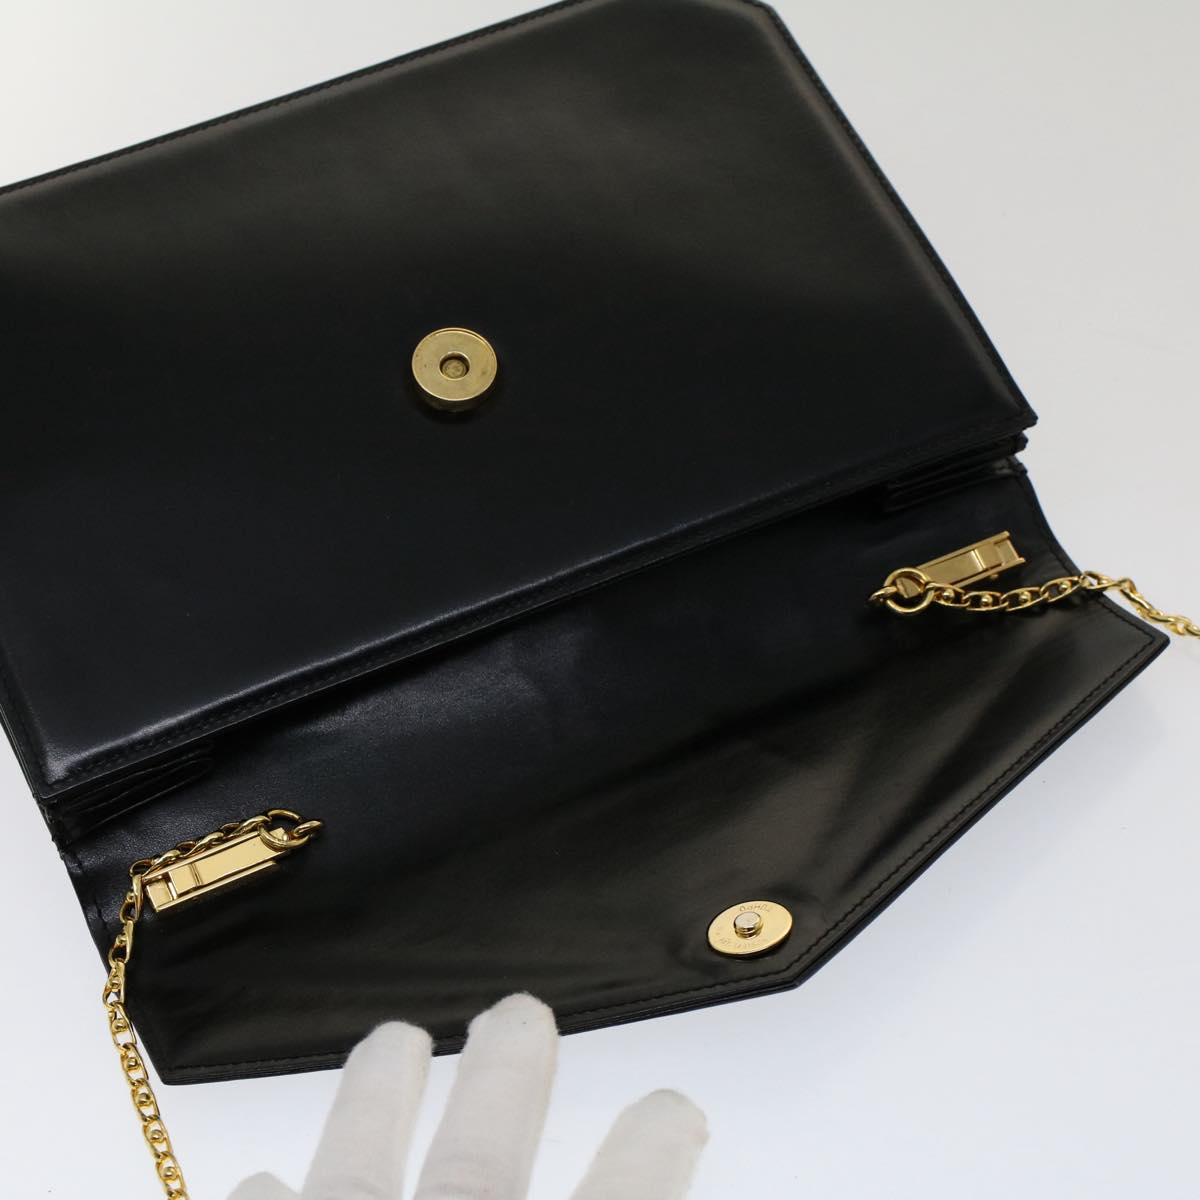 GIVENCHY Chain Shoulder Bag Leather Black Auth 50520